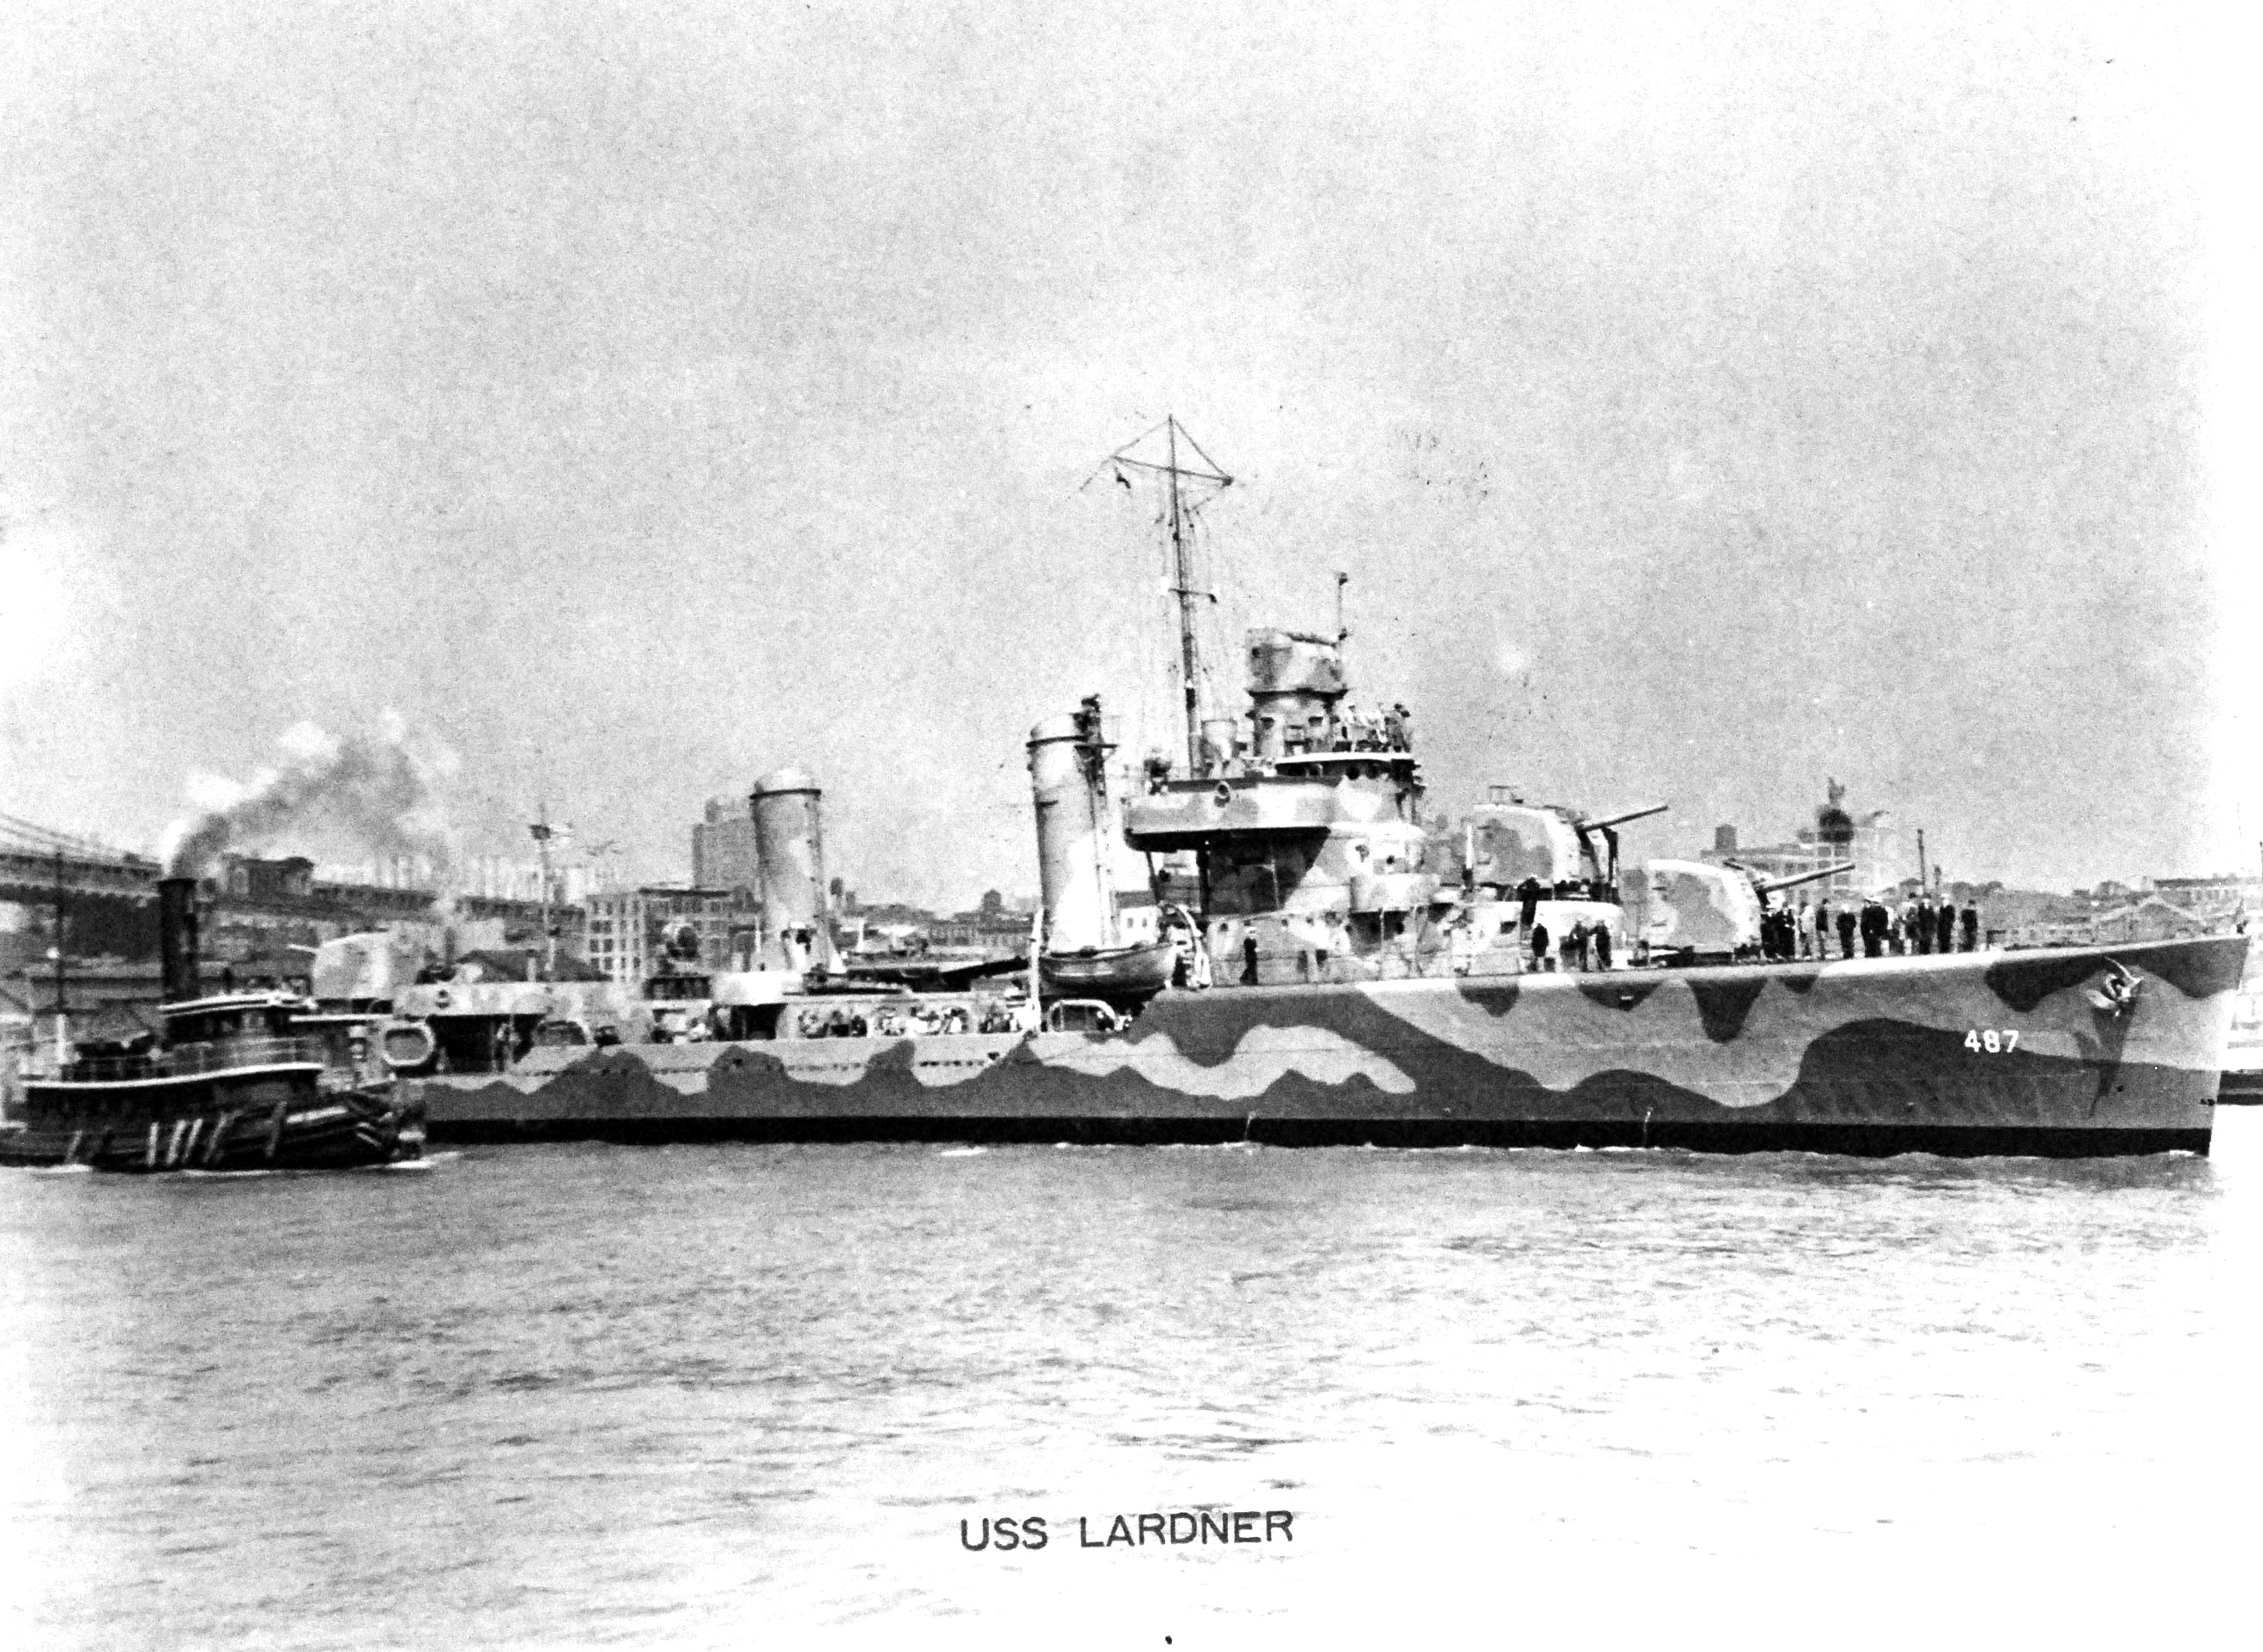 Destroyer USS Lardner, assisted by the tug Captain Seawall, makes her way across New York Harbor, May 1942. Lardner wears Measure 12 (modified) paint scheme.